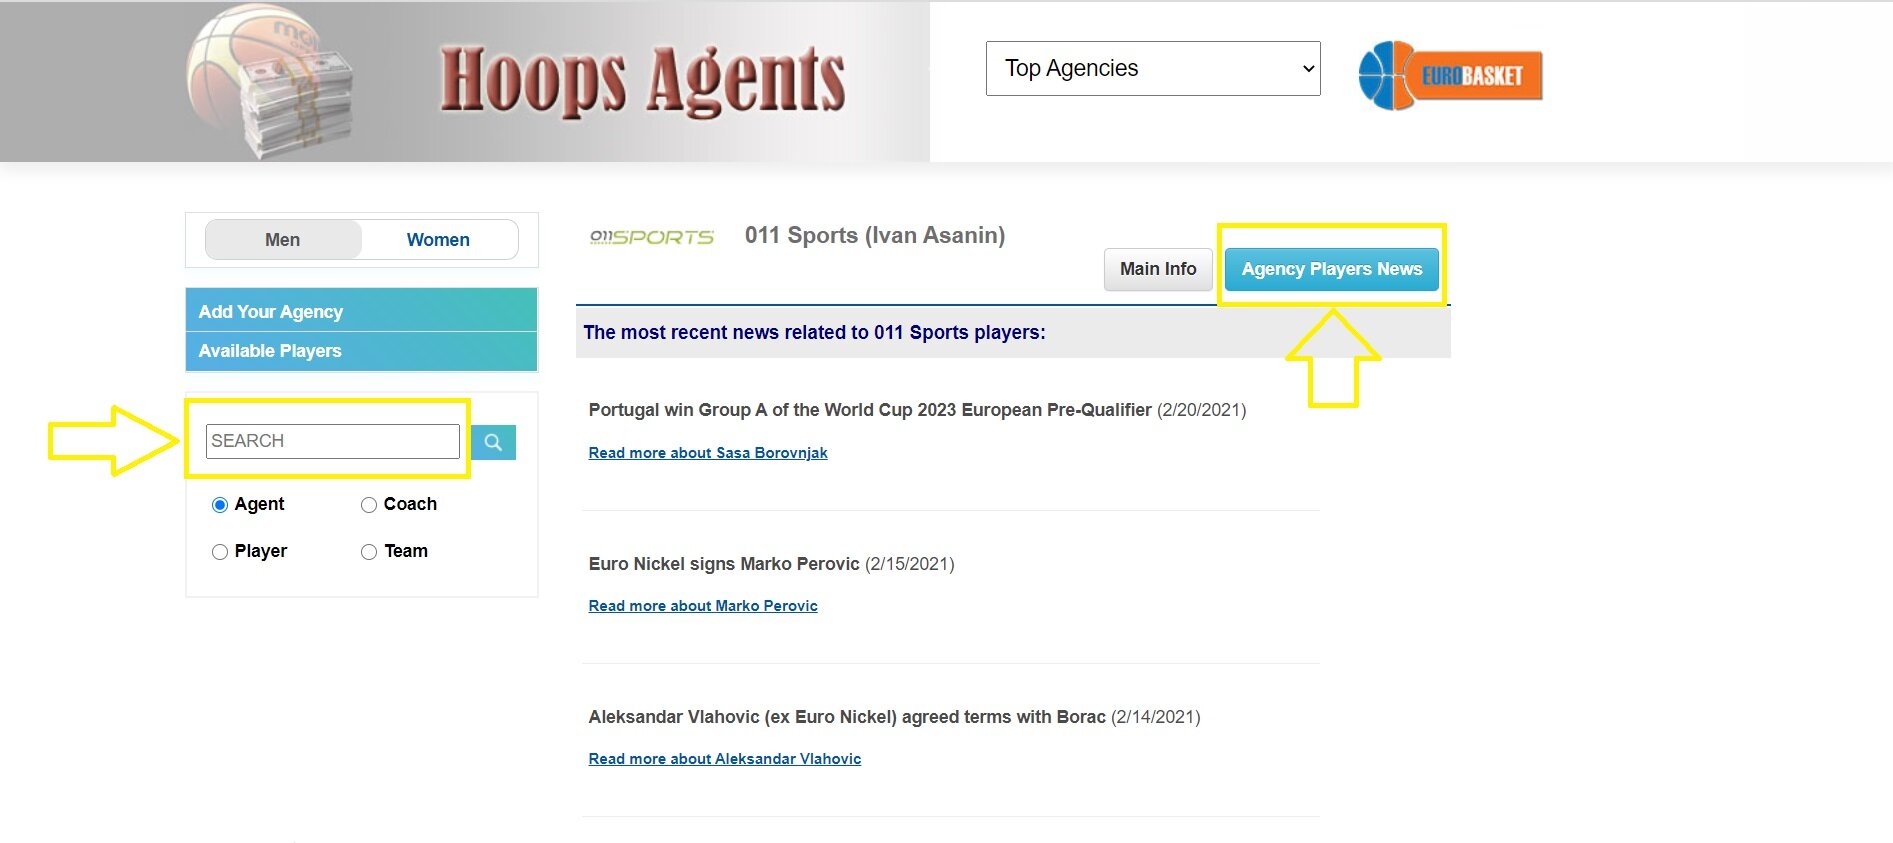 Hoops Agents can provide a helpful platform to find basketball agents.